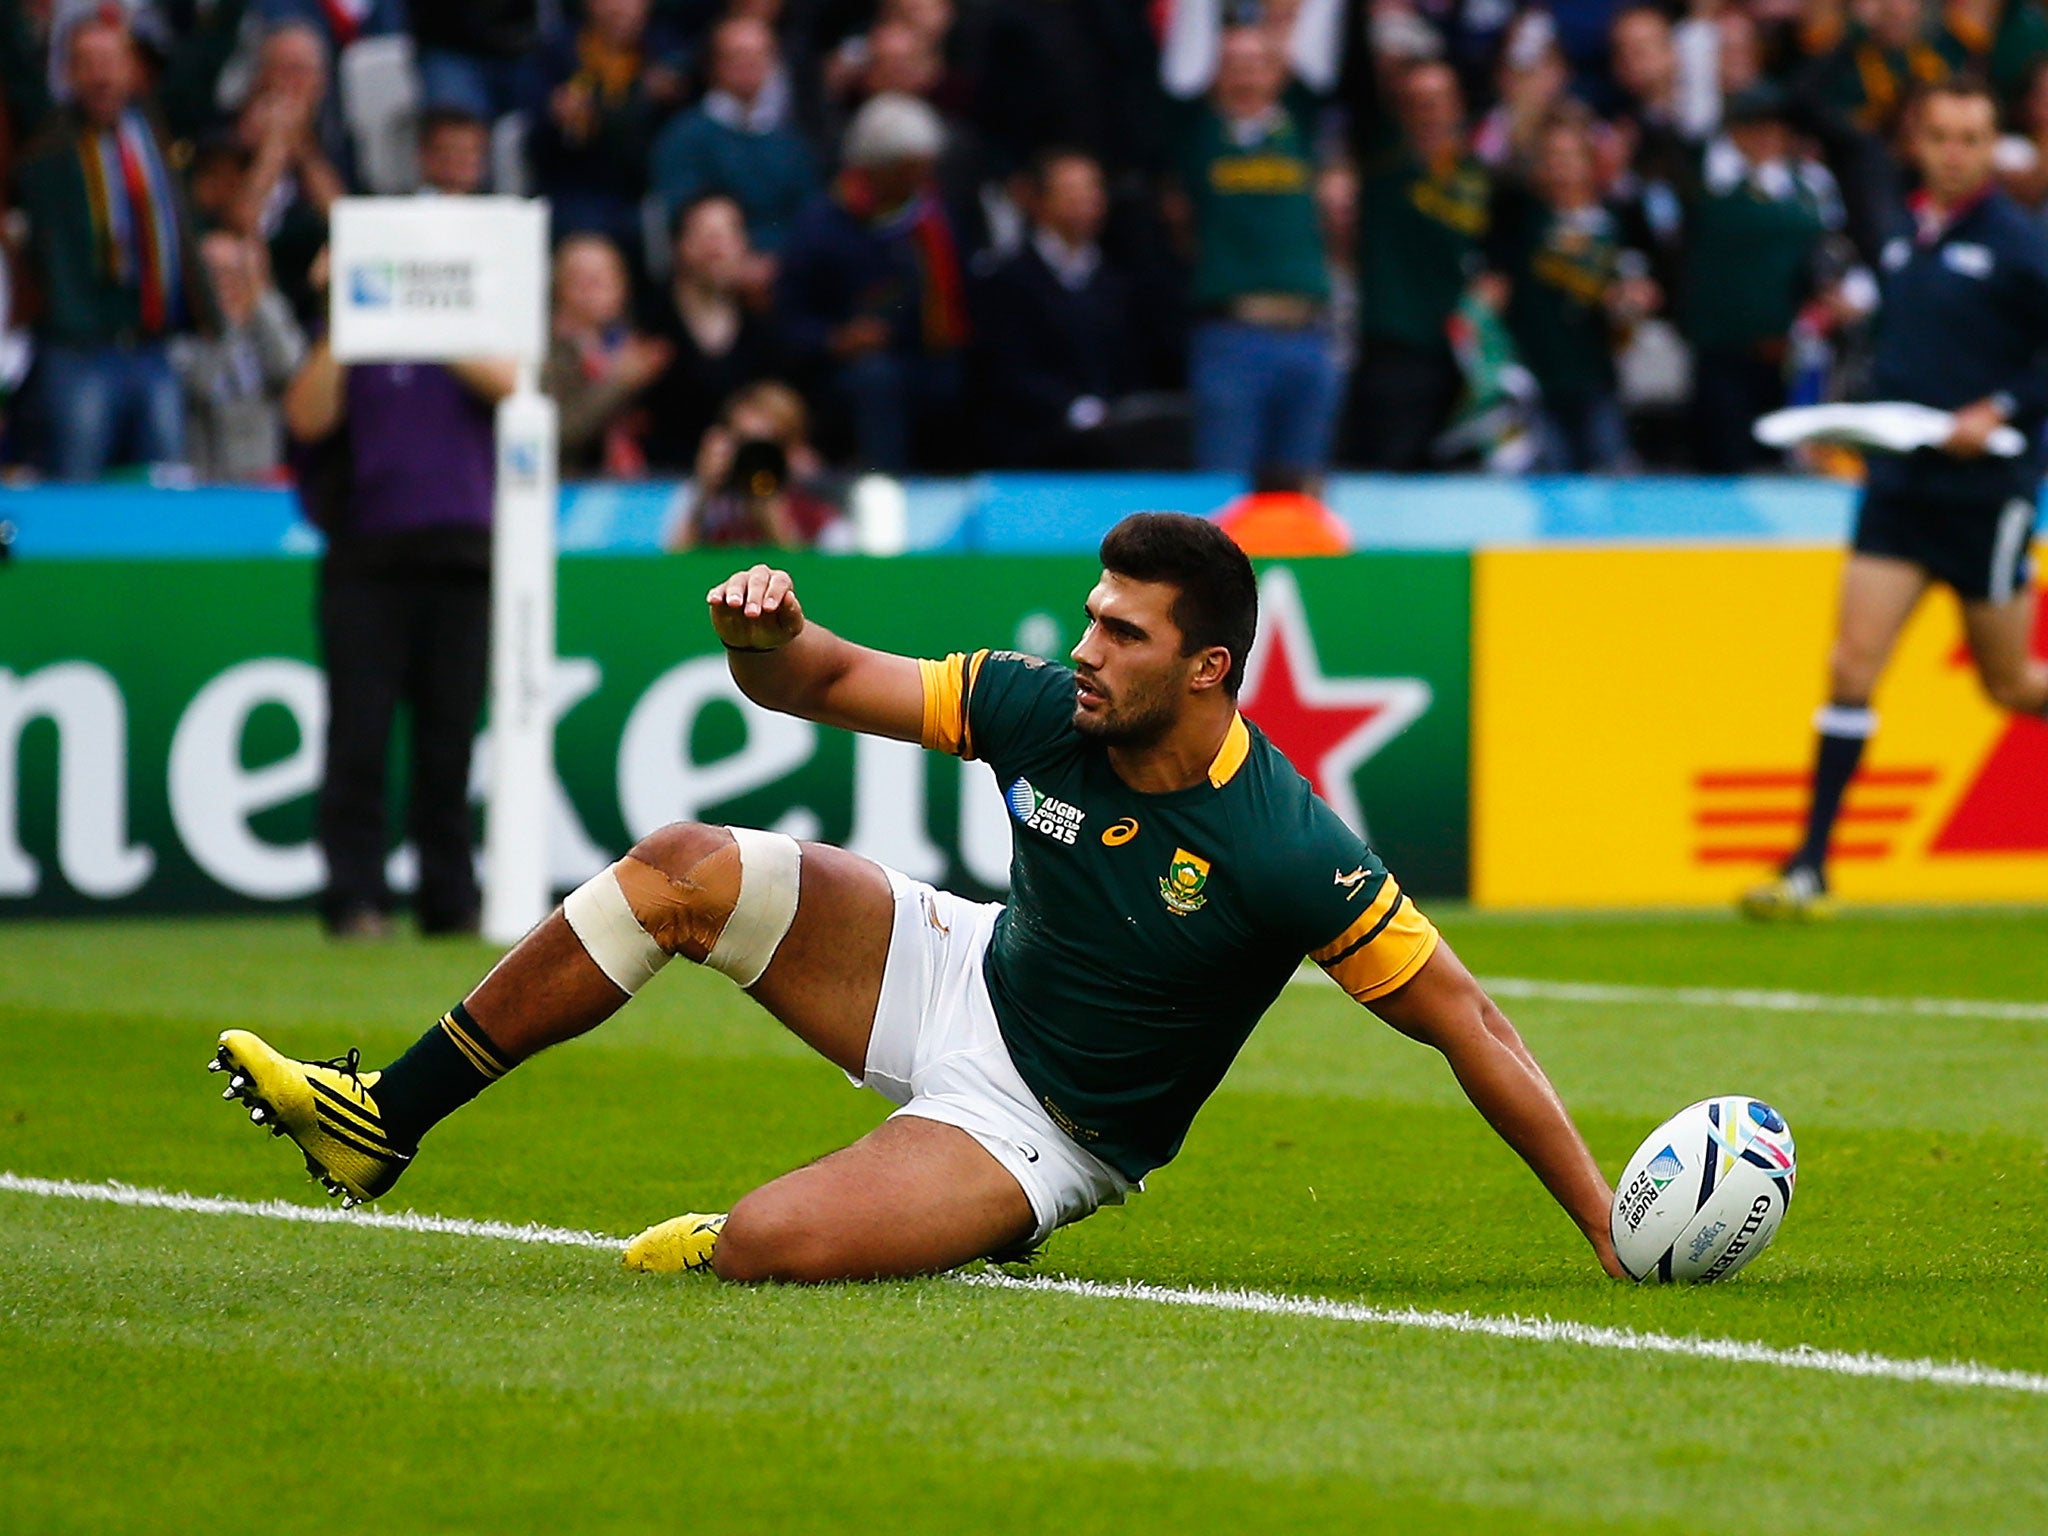 Damian De Allende scores a try for South Africa